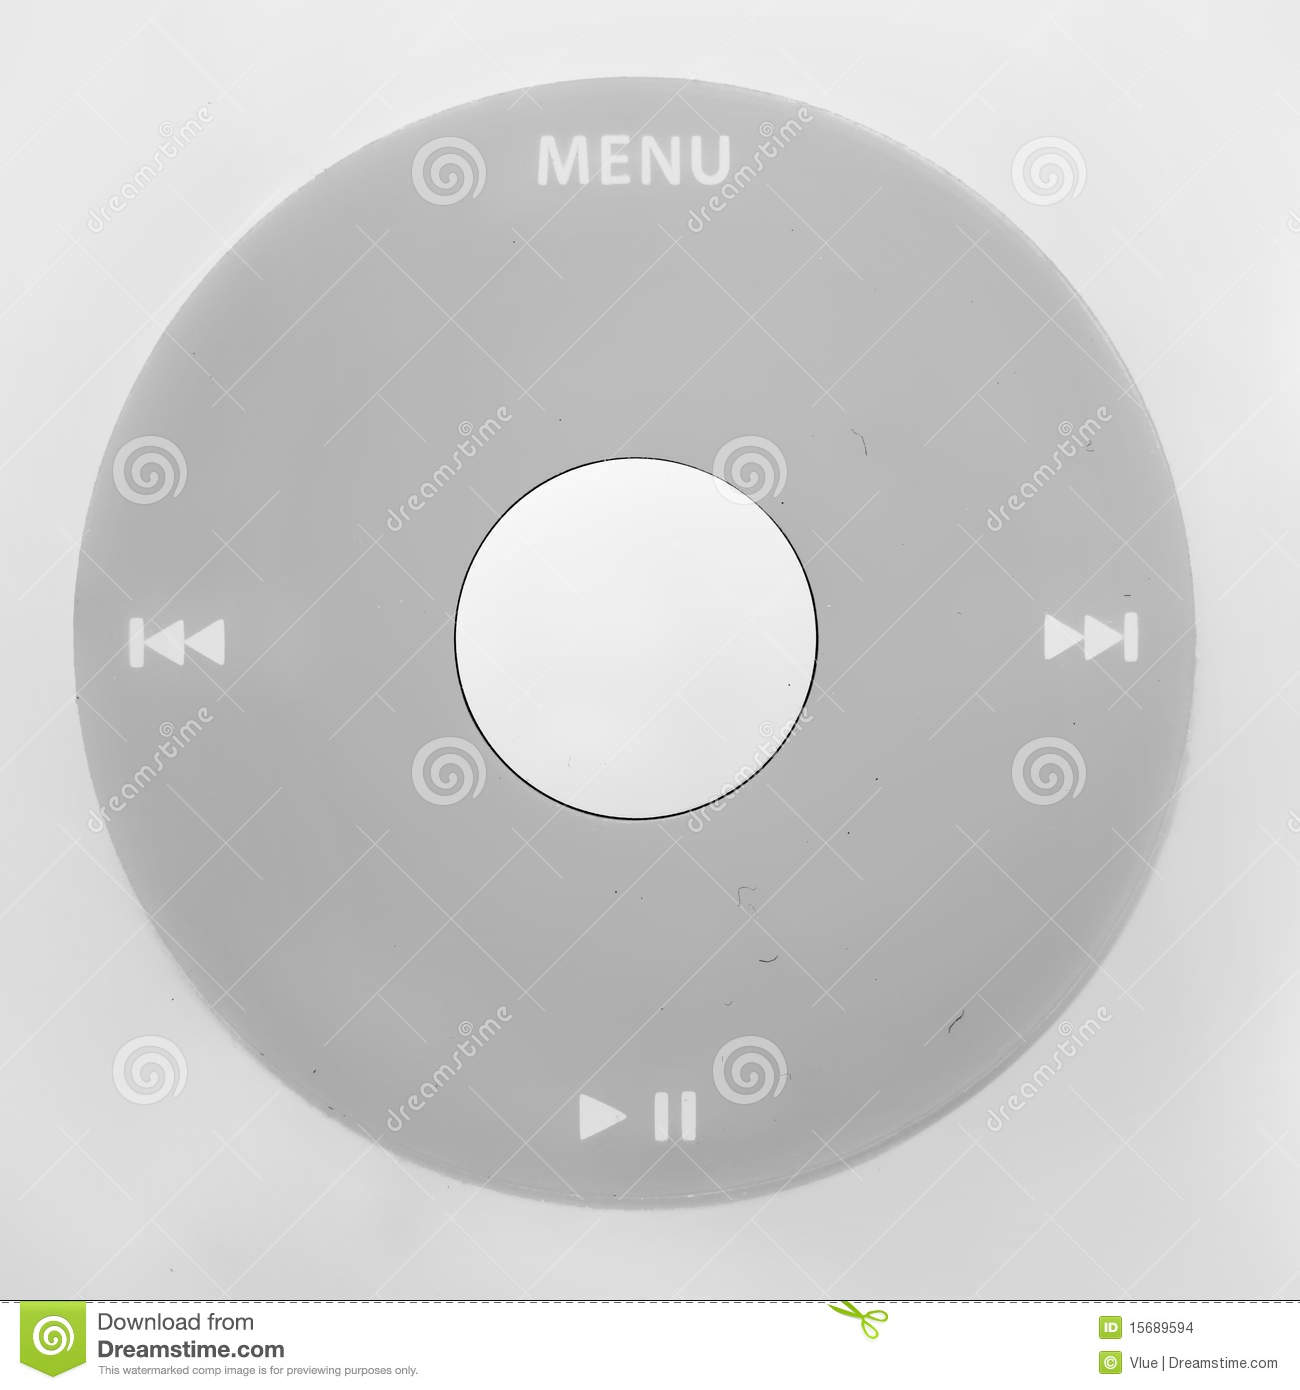 Mp3 Player Wheel With Multimedia Controls Including Play Pause Skip